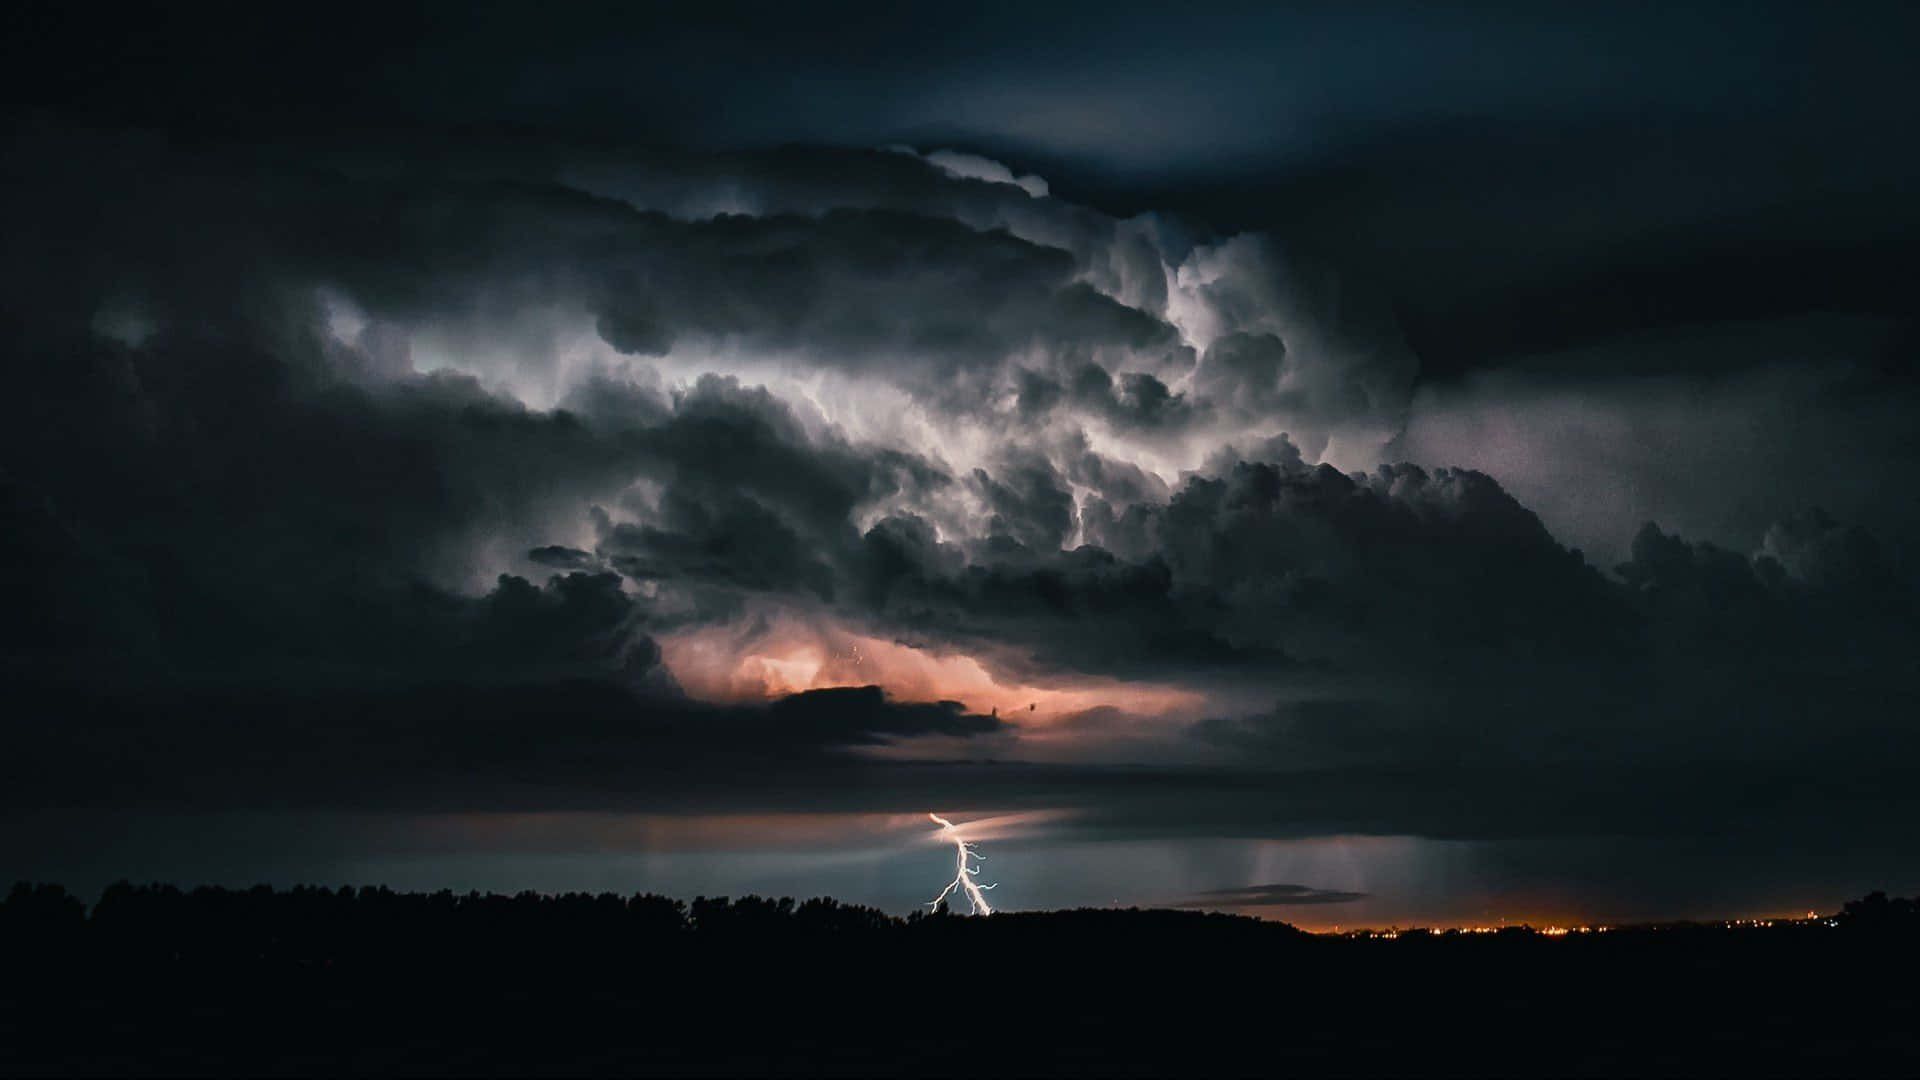 A powerful thunderstorm rushes across the sky.